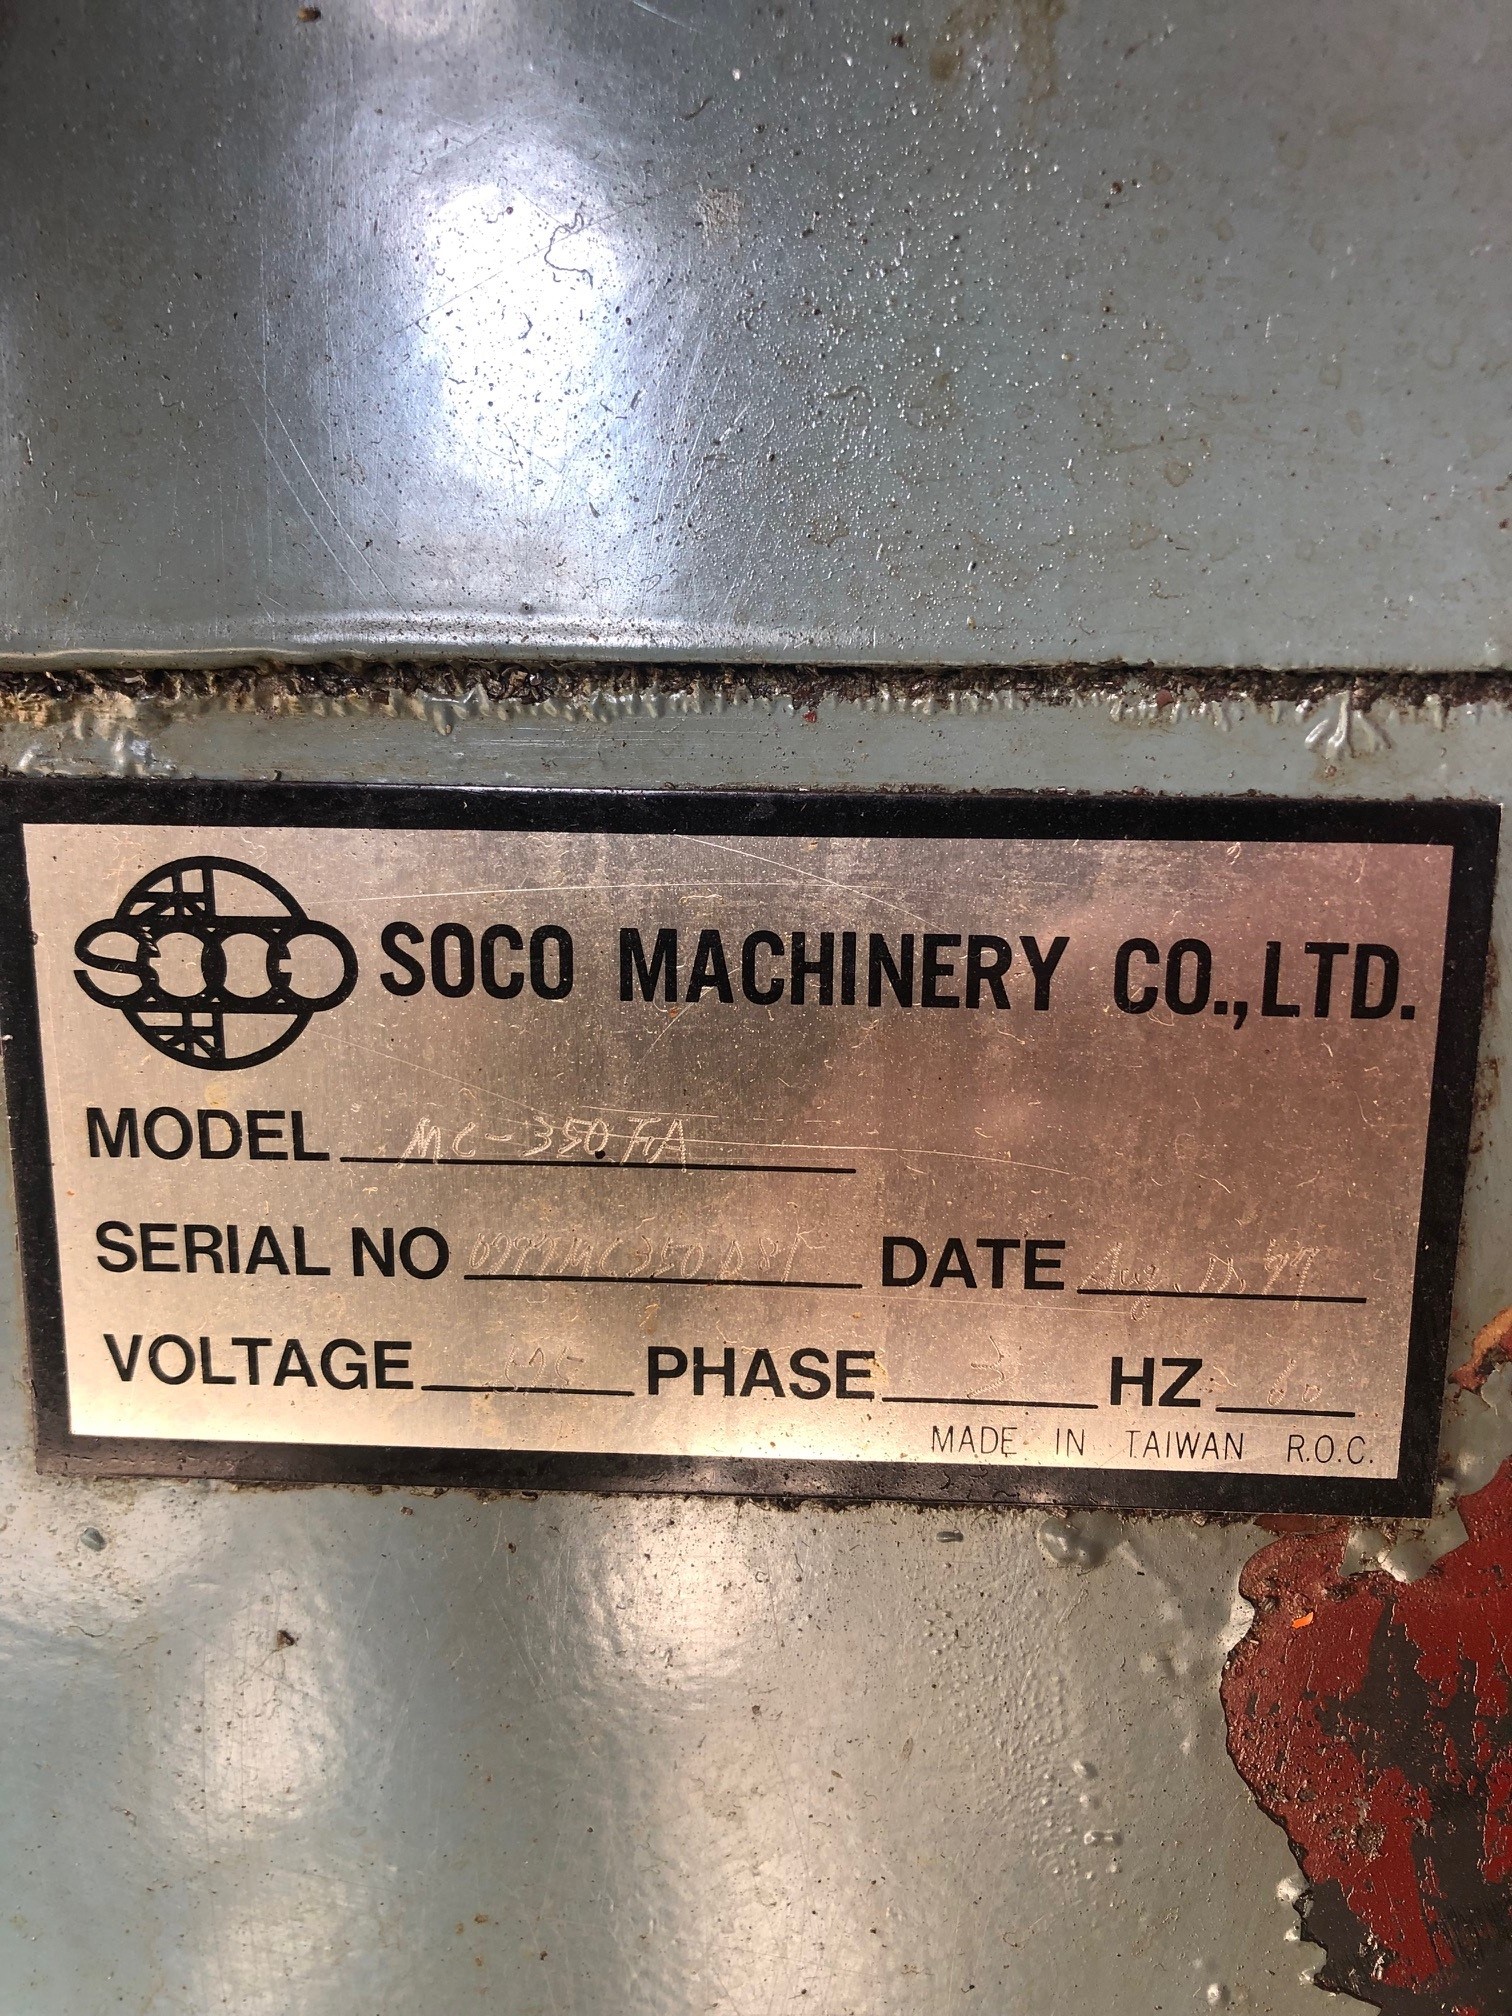 model number of specific machine